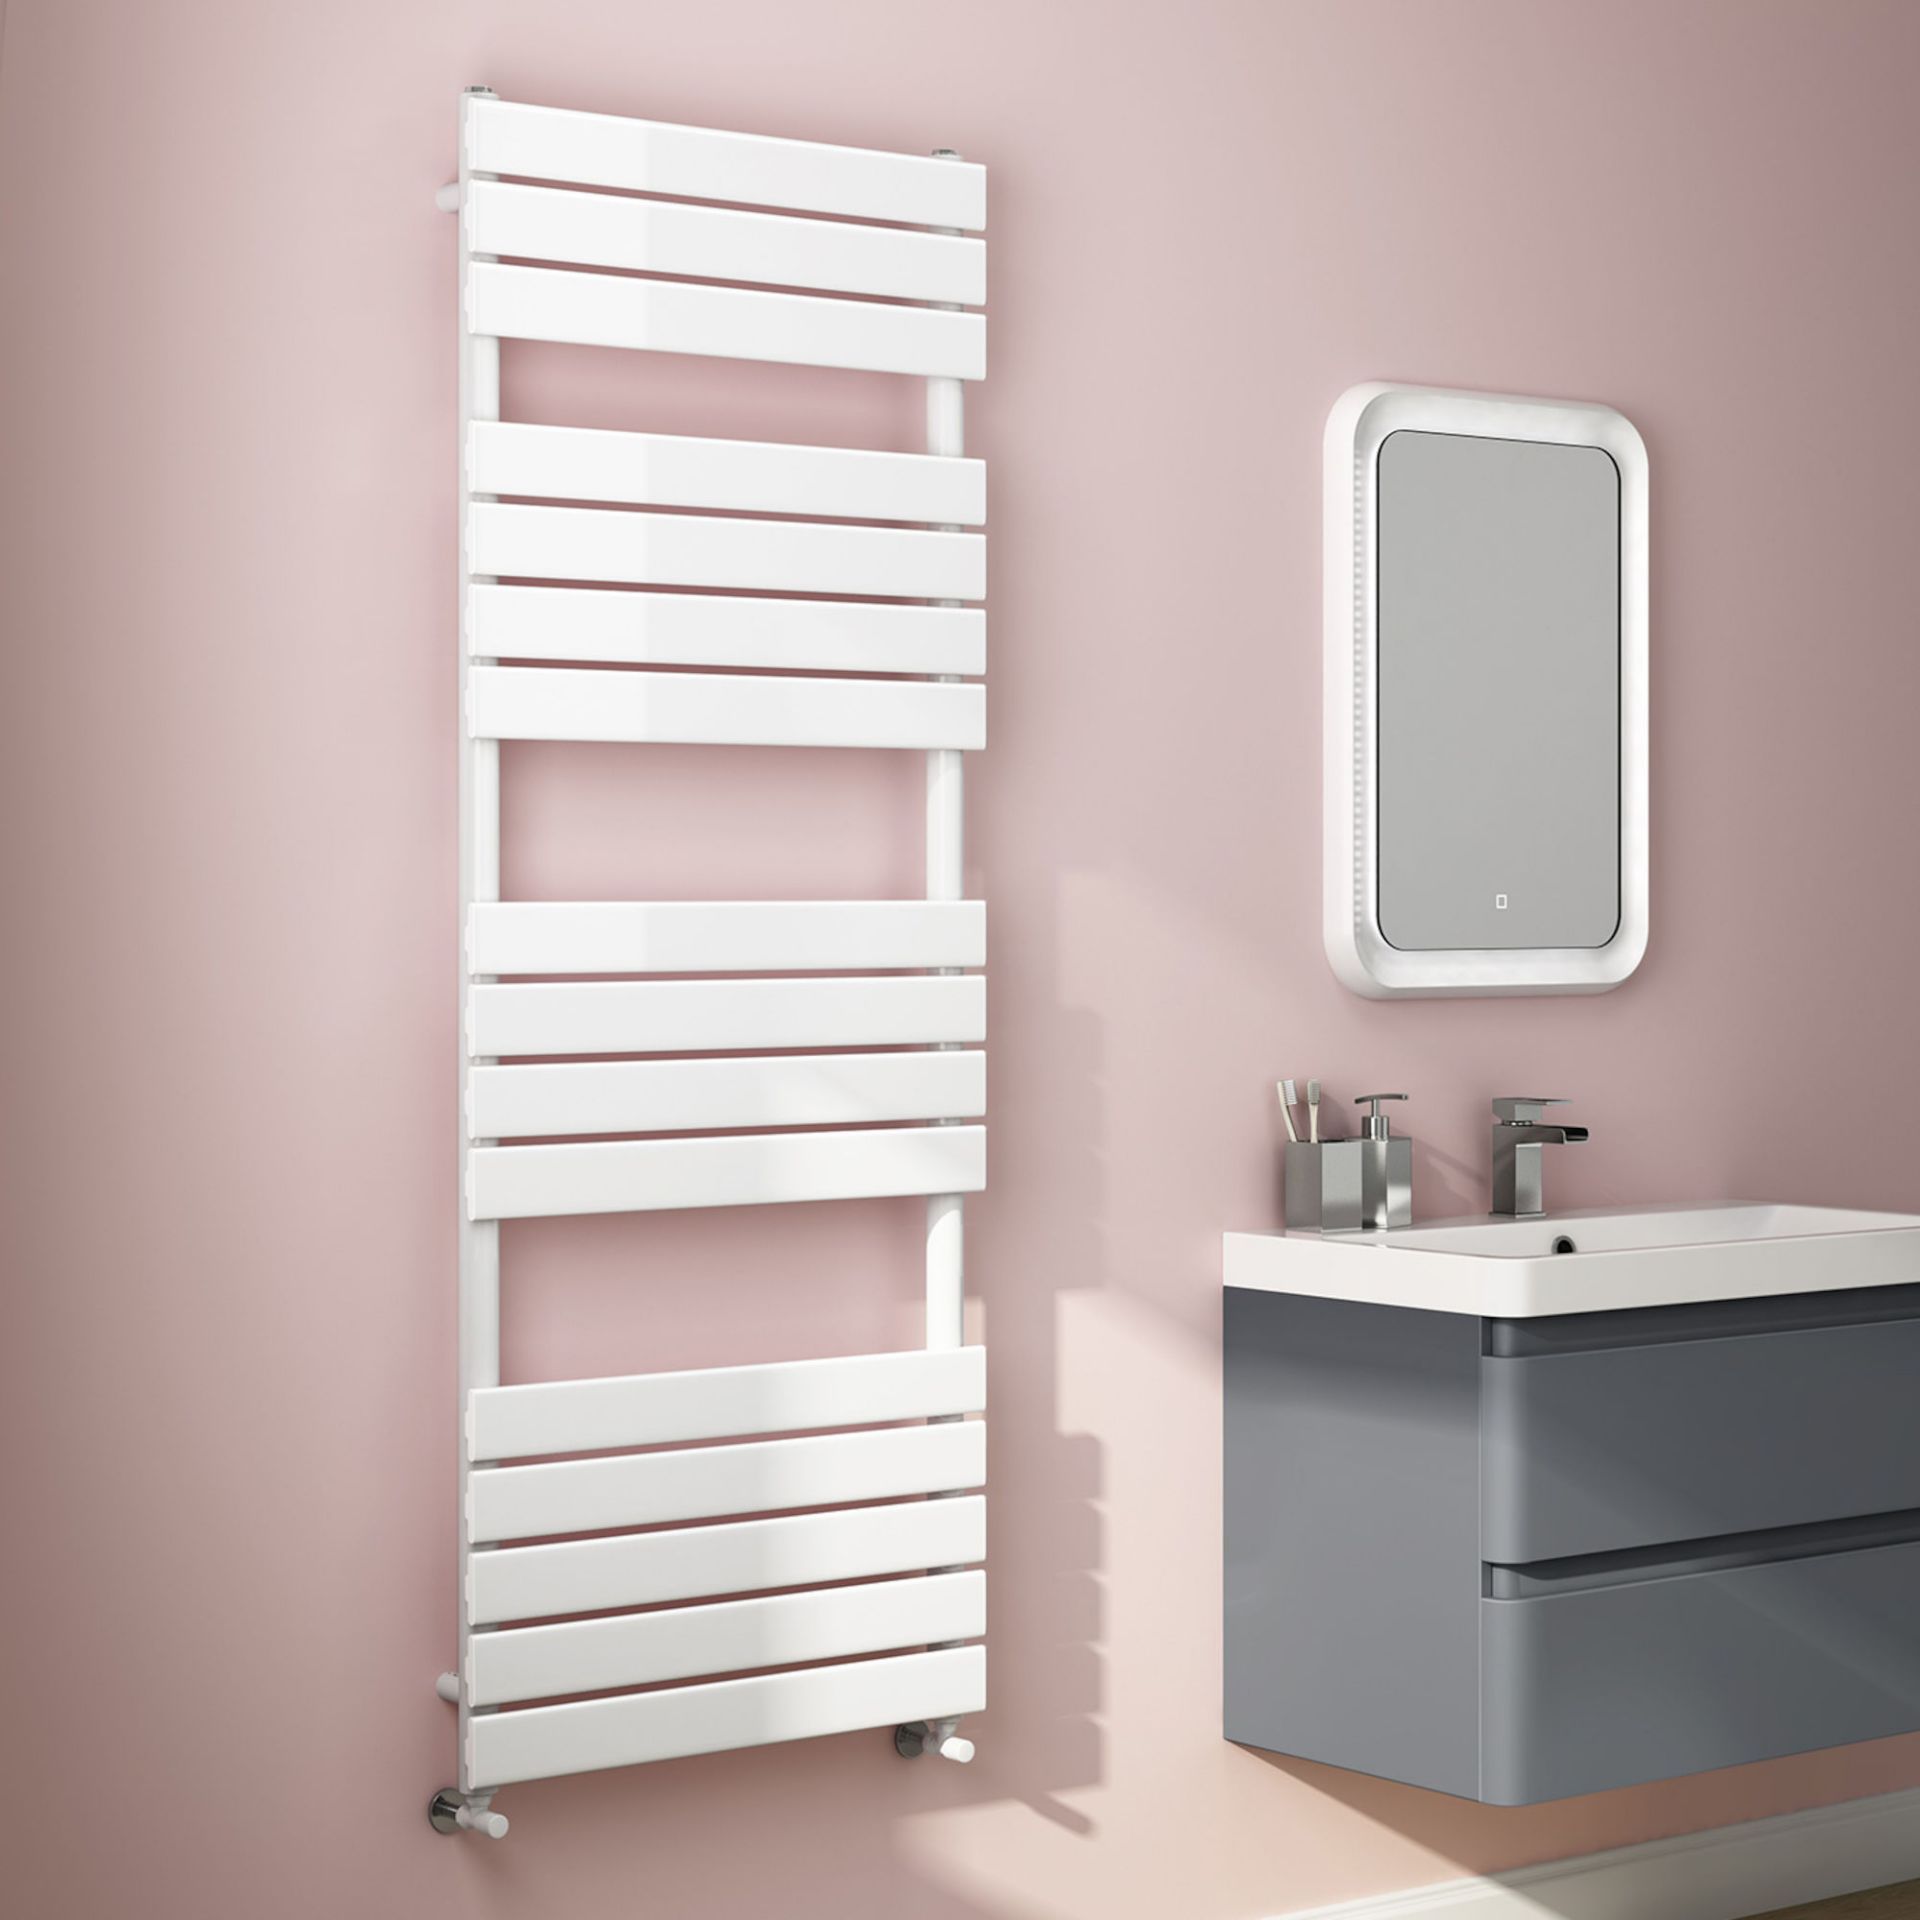 (TP156) 1600x600mm White Flat Panel Ladder Towel Radiator. RRP £349.99. Made from low carbon steel